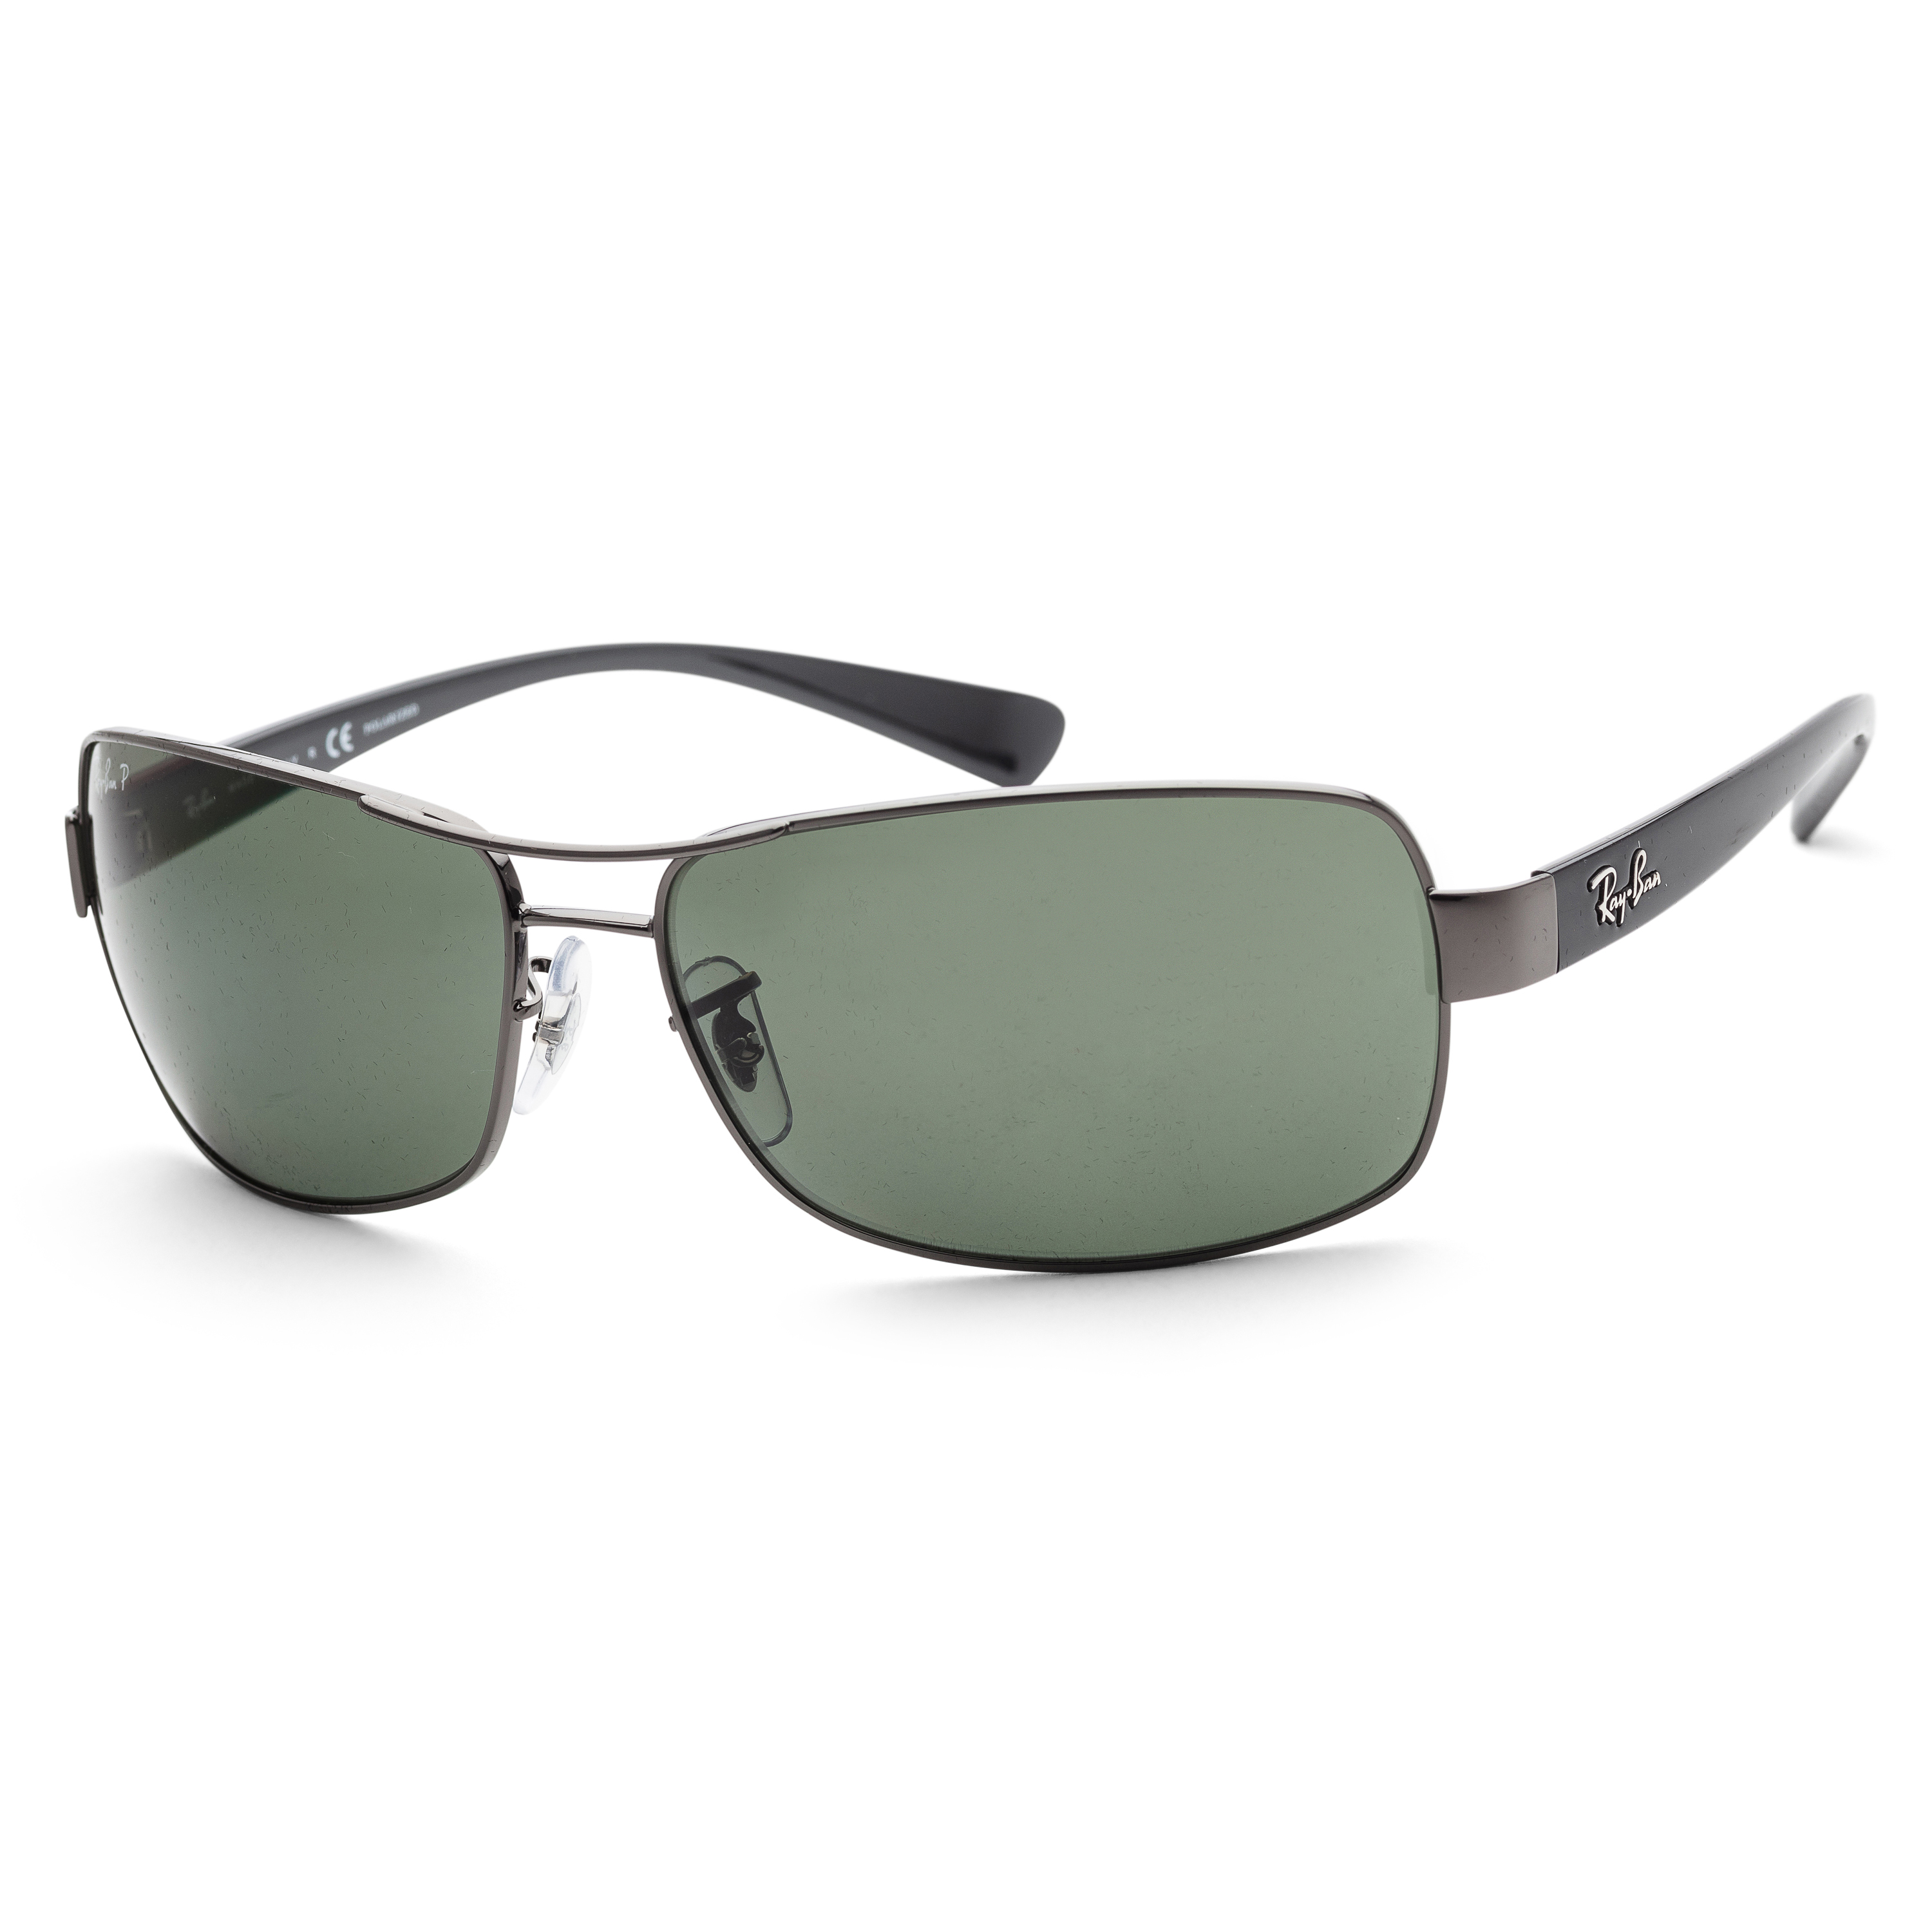 Ray-Ban Men's Polarized RB3379-004/58-64 Silver Rectangle Sunglasses - image 1 of 2